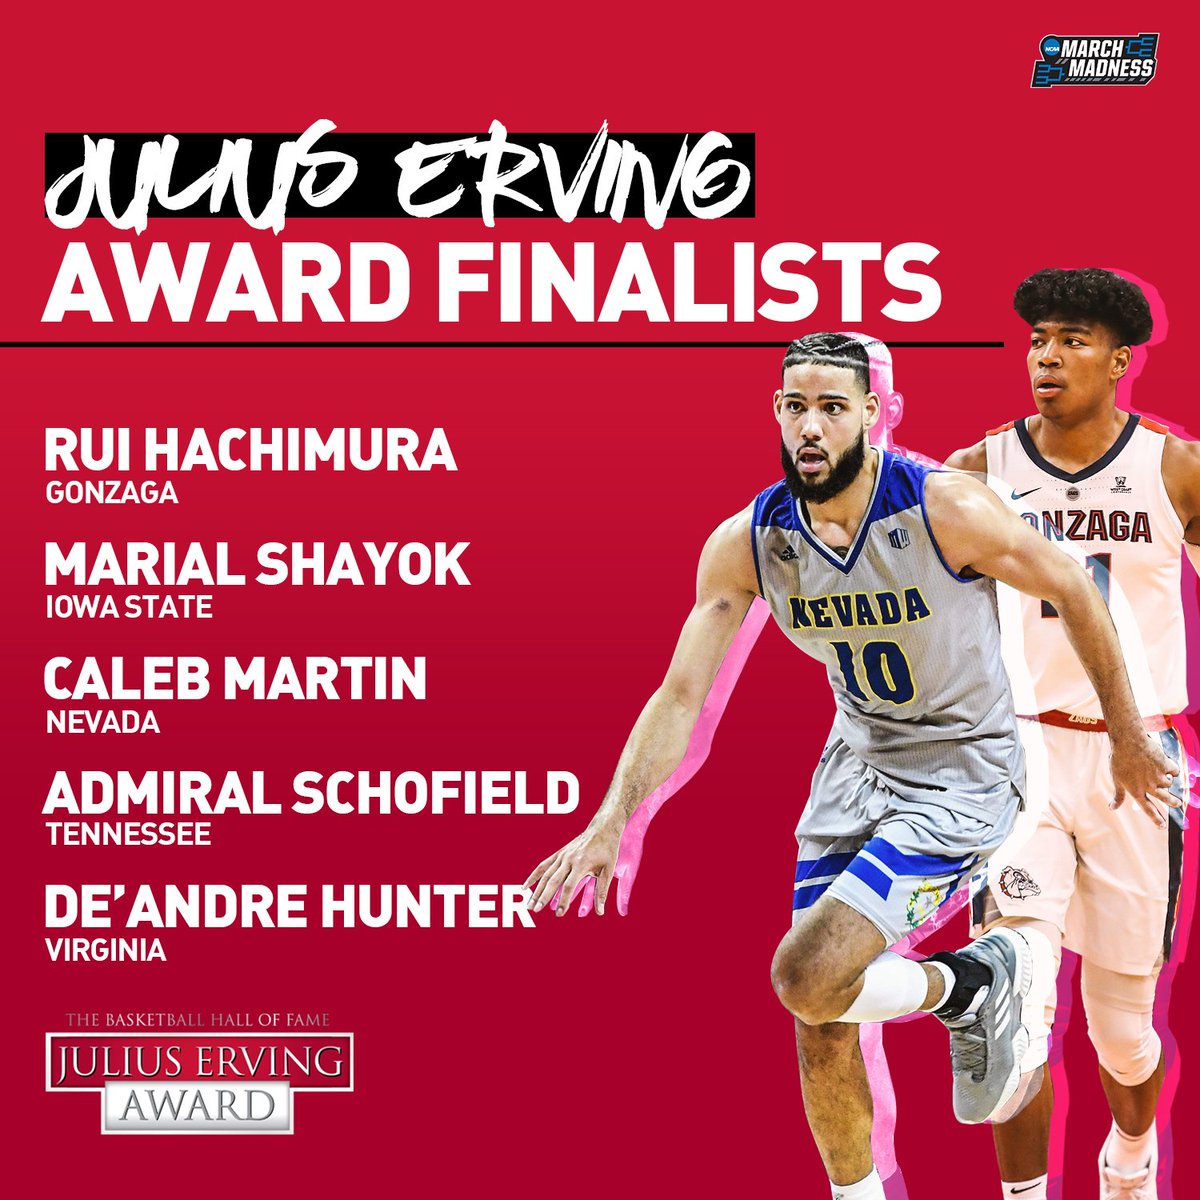 #ErvingAward Finalists

Rui Hachimura
Marial Shayok
Caleb Martin
Admiral Schofield
De’Andre Hunter

Who is the top SF in the country?